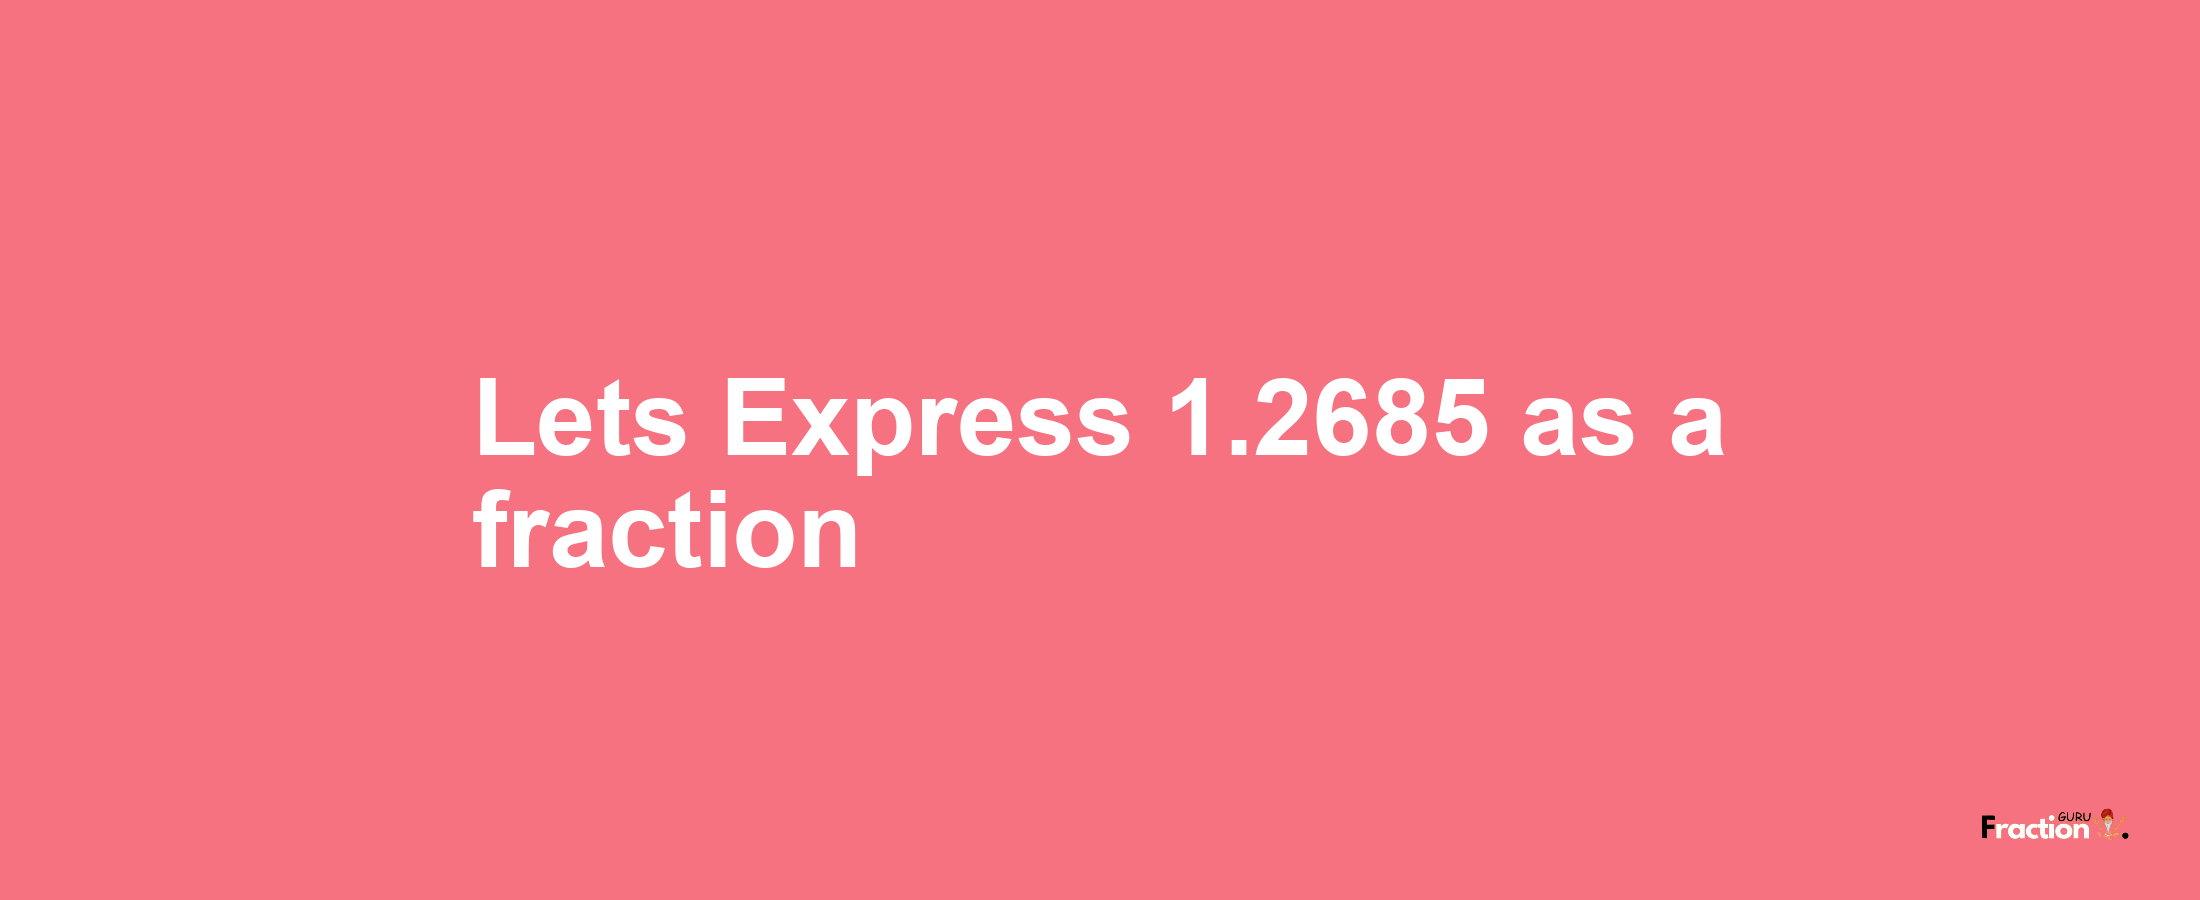 Lets Express 1.2685 as afraction